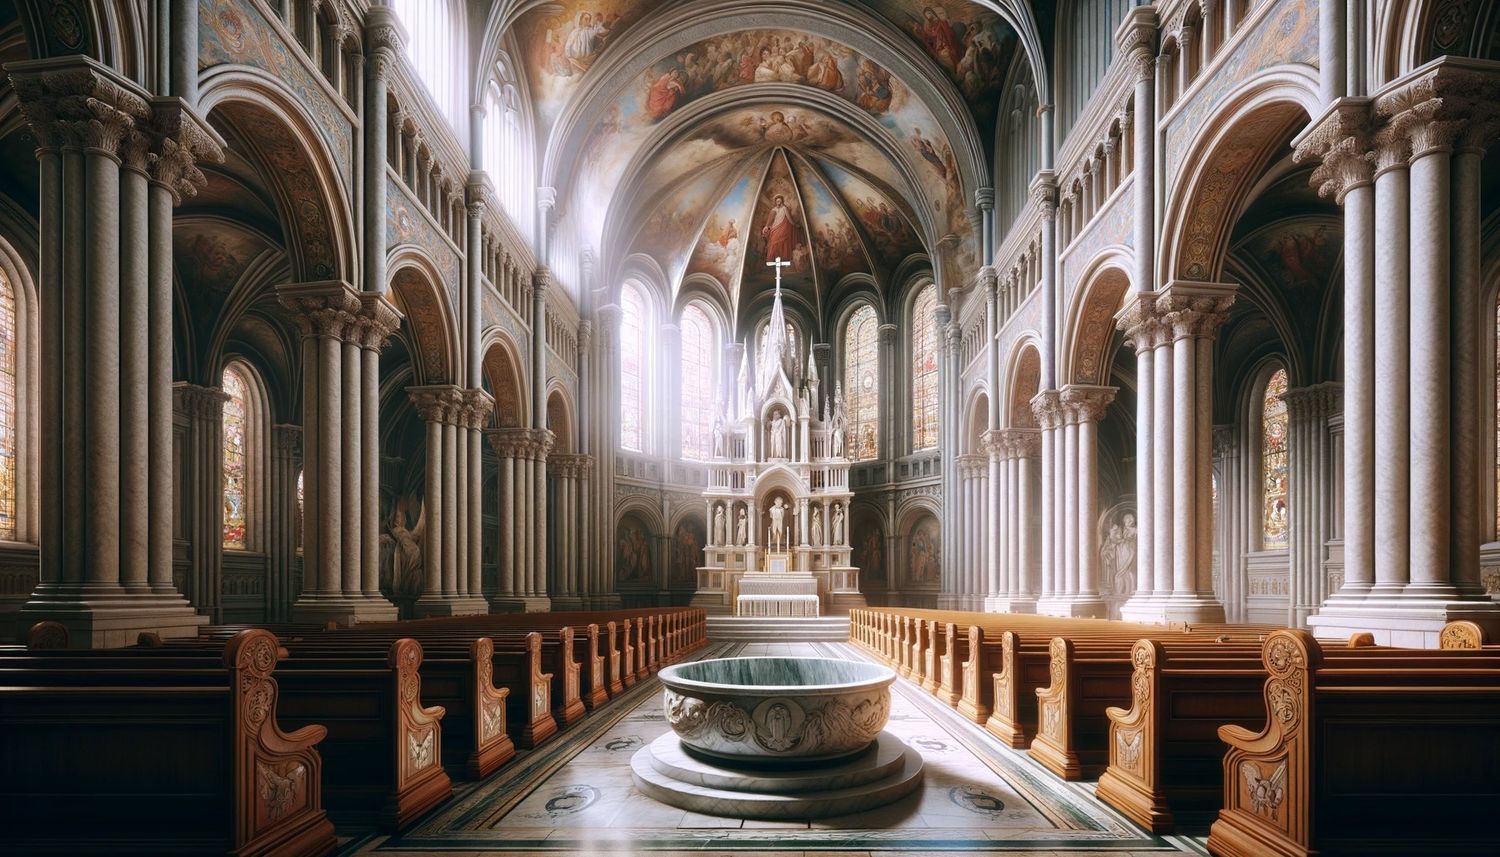 What Church Was Used For The Baptism Scene In The Godfather